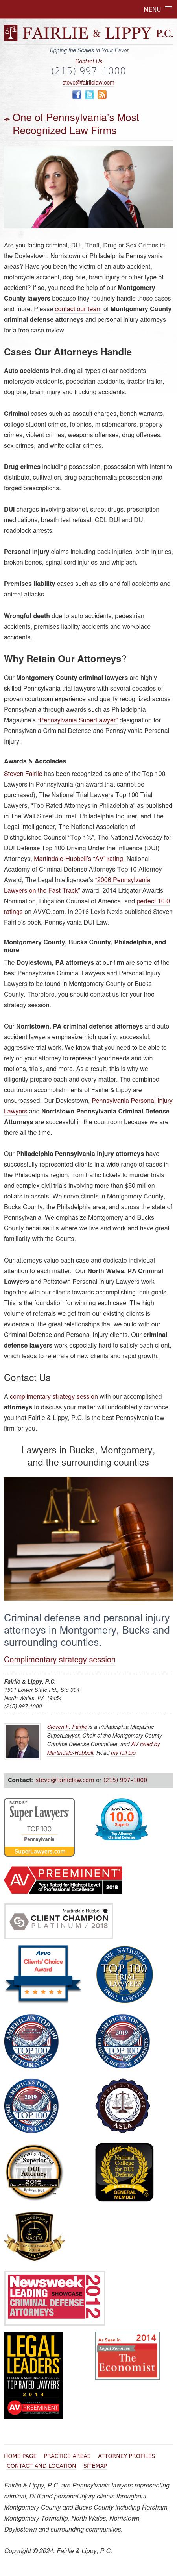 Fairlie & Lippy, P.C. - North Wales PA Lawyers